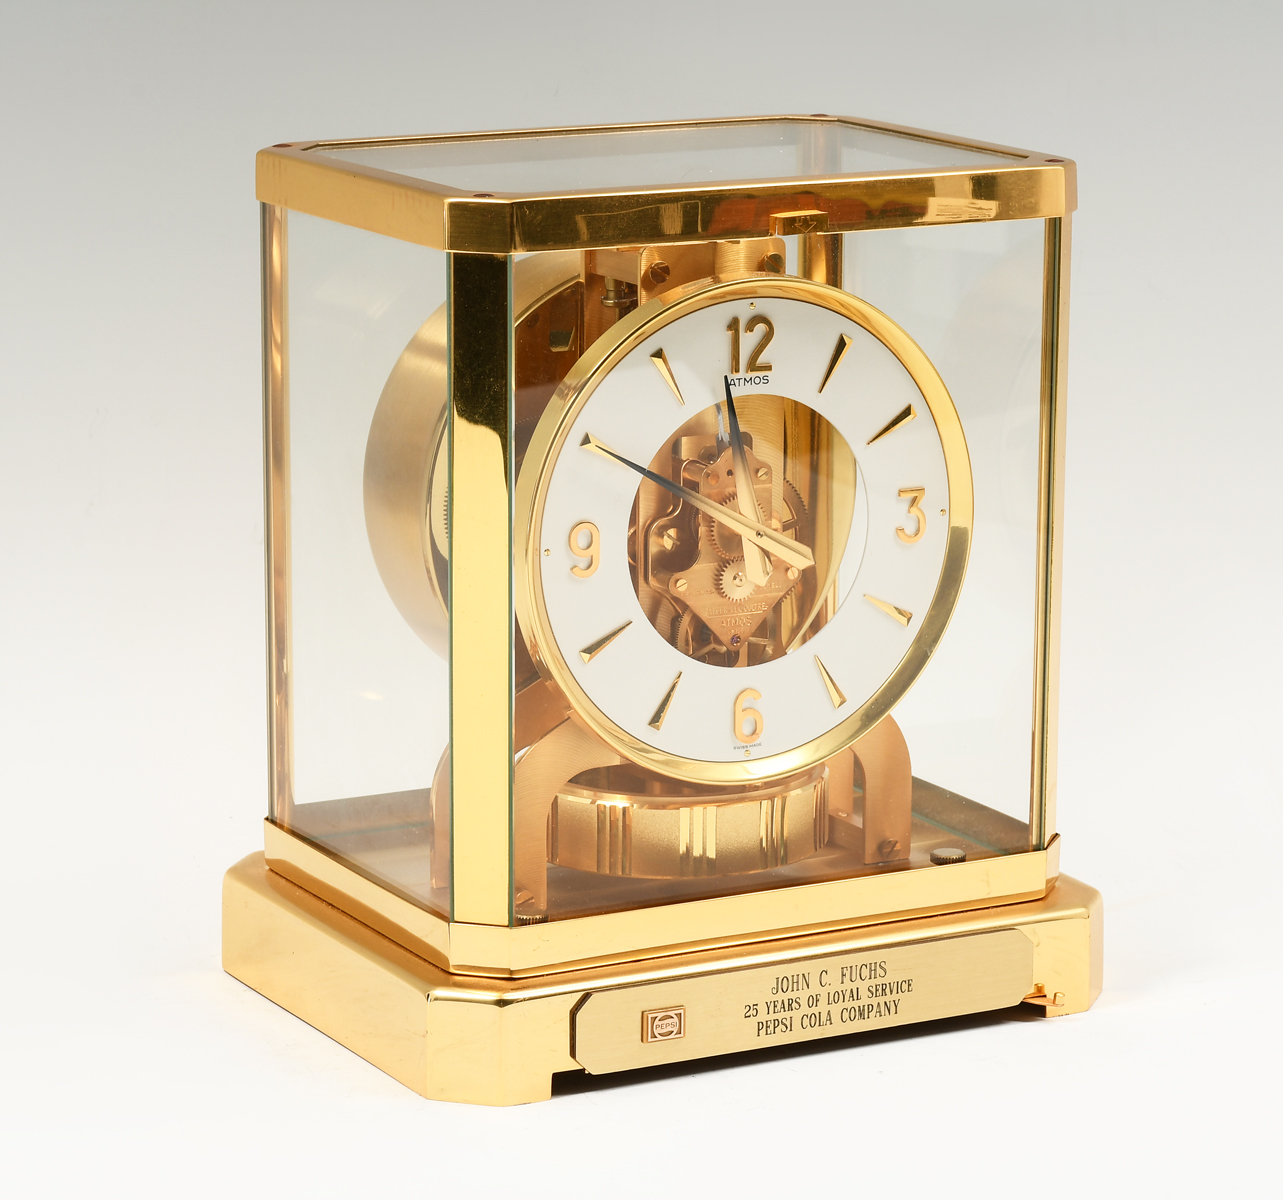 LE COULTRE 15 JEWEL ATMOS CLOCK: